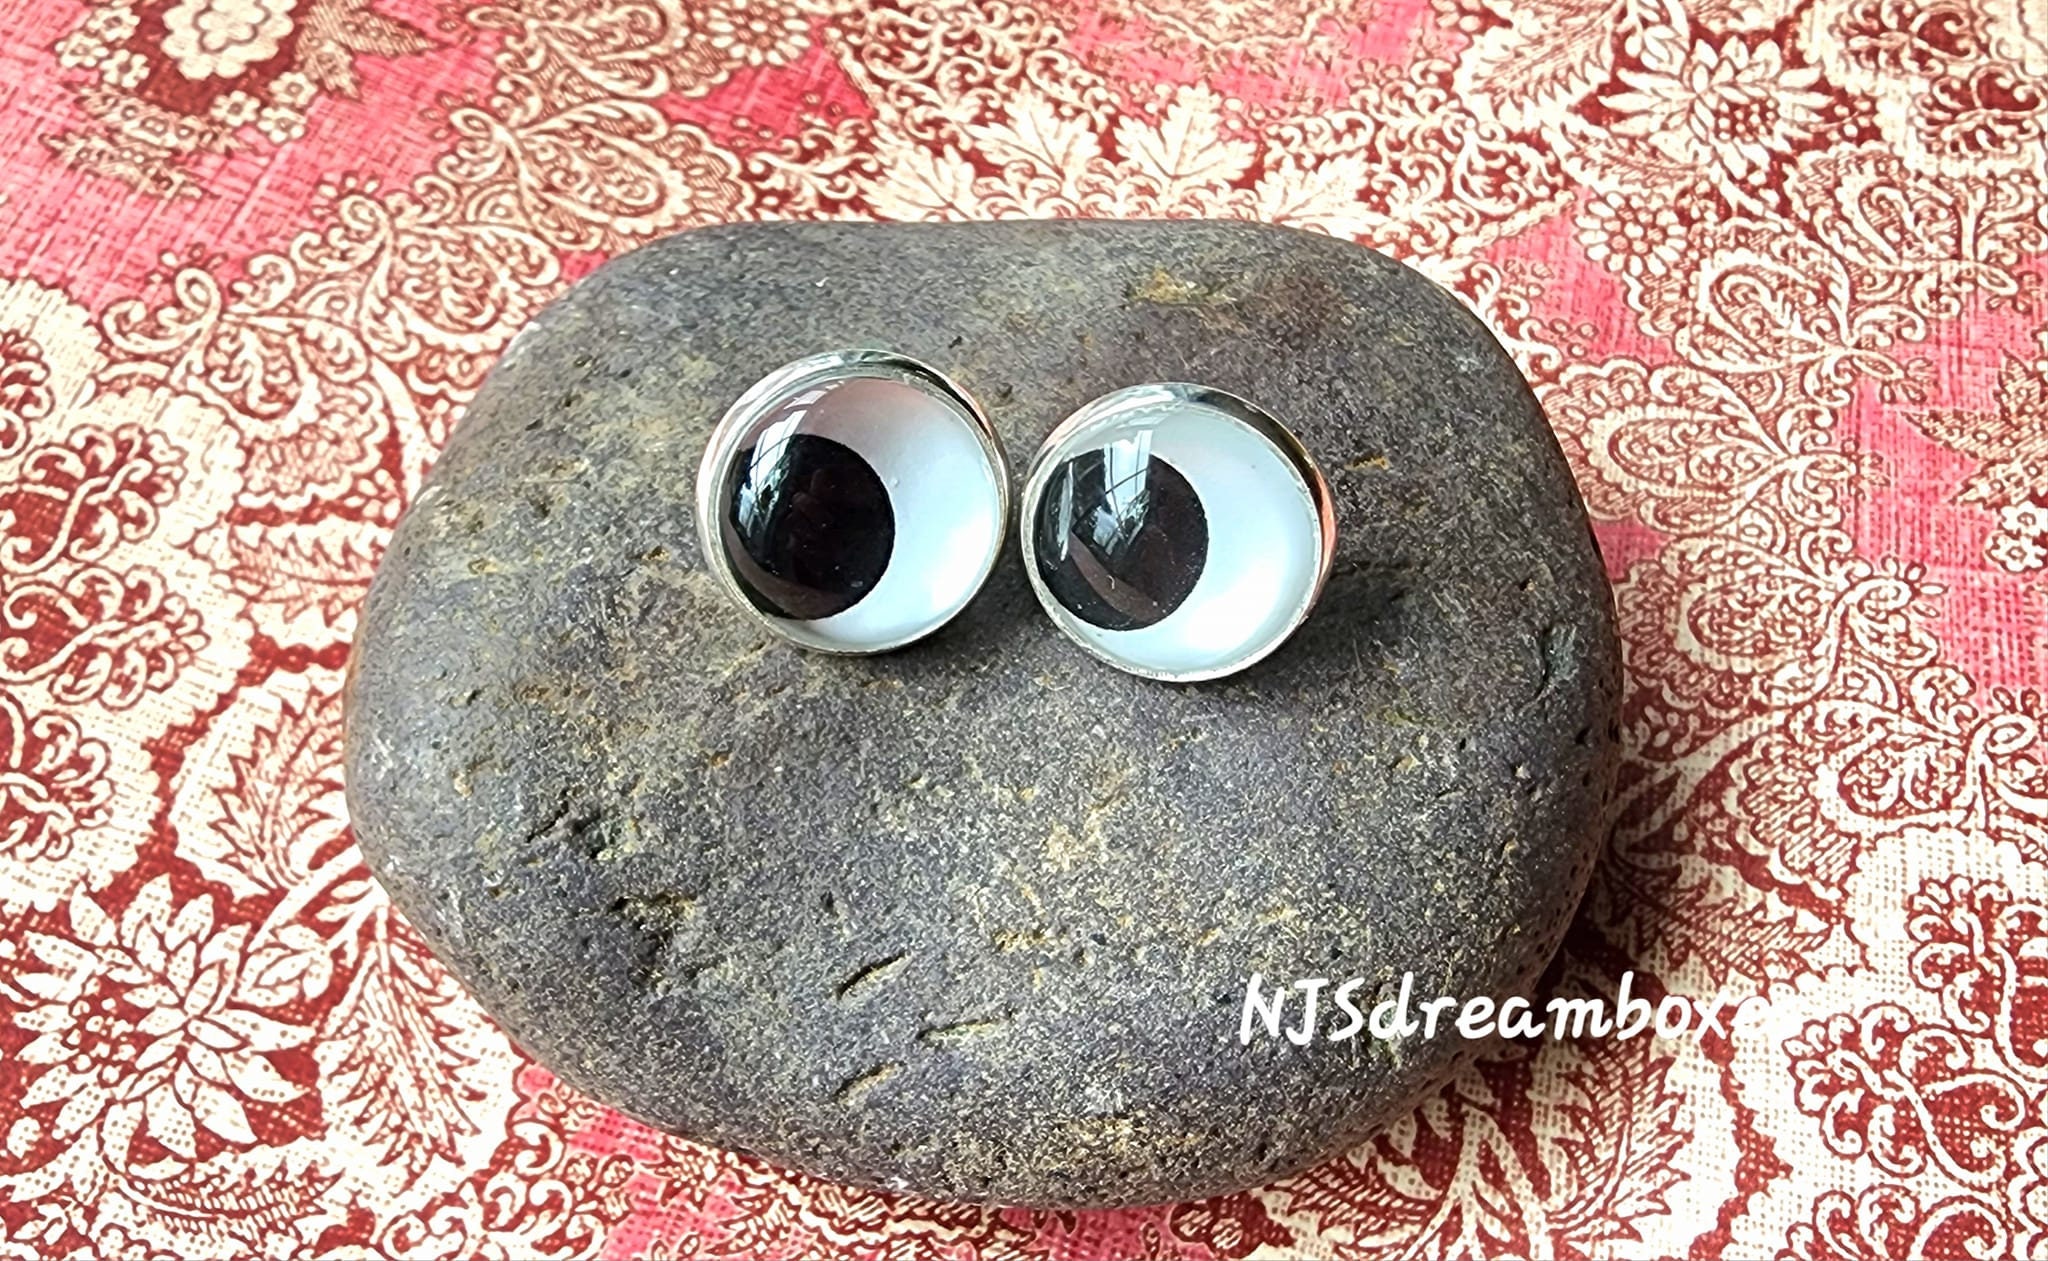 Googly Eye Finger Puppet Earrings - Choose Your Color, Steal The Show | One Stop Rave Yellow